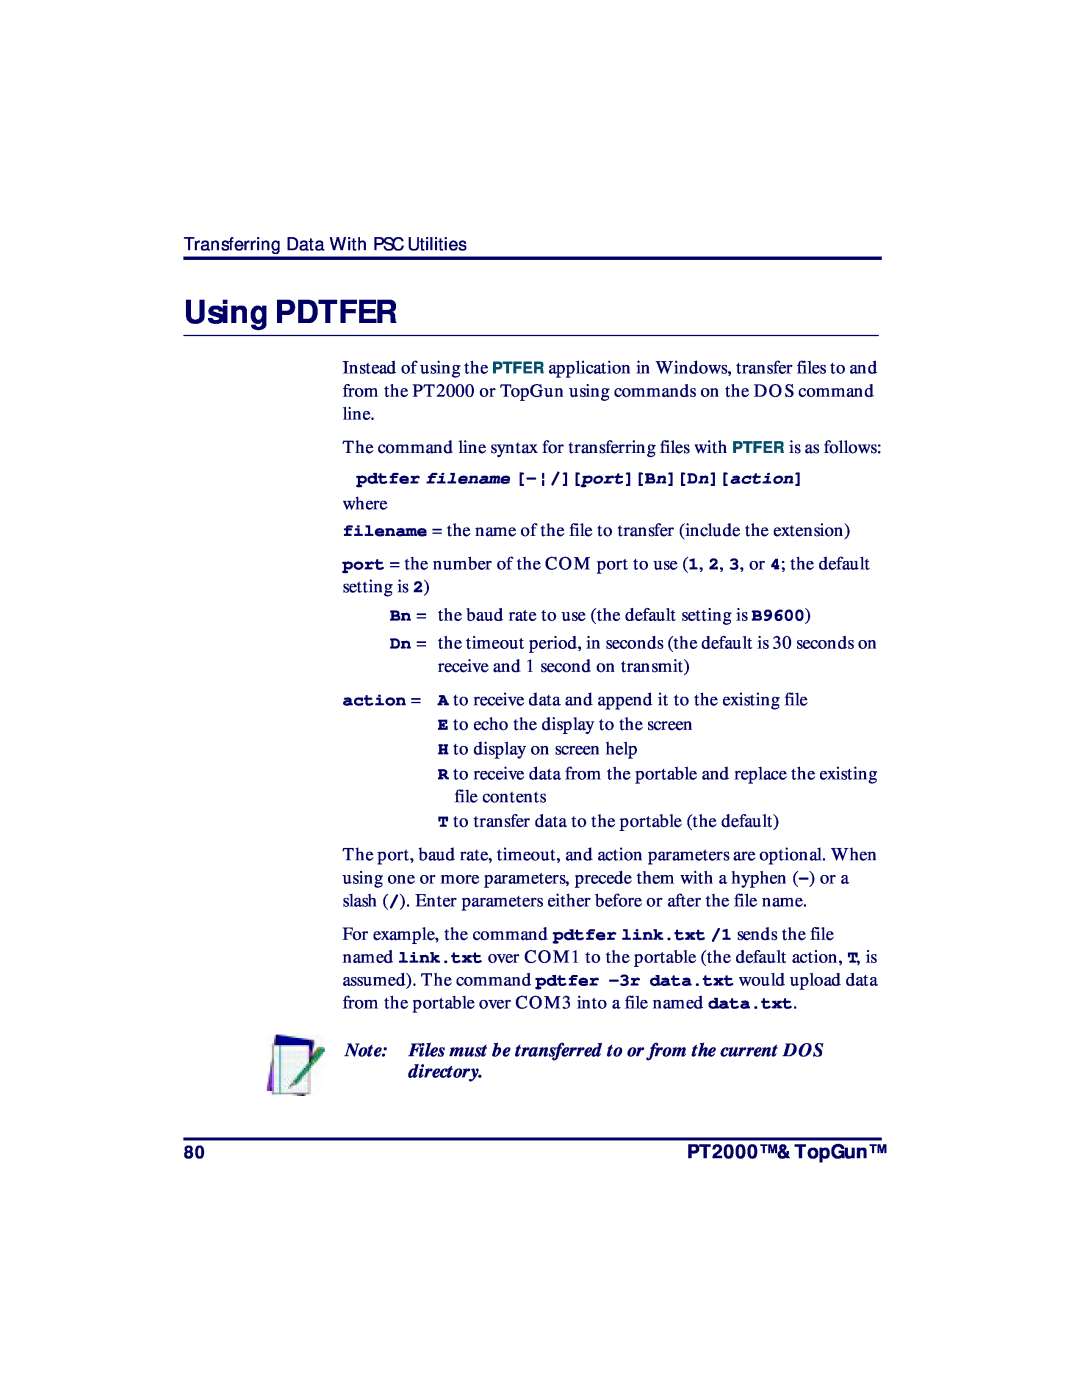 PSC TopGun, PT2000 manual Using PDTFER, Note Files must be transferred to or from the current DOS directory 